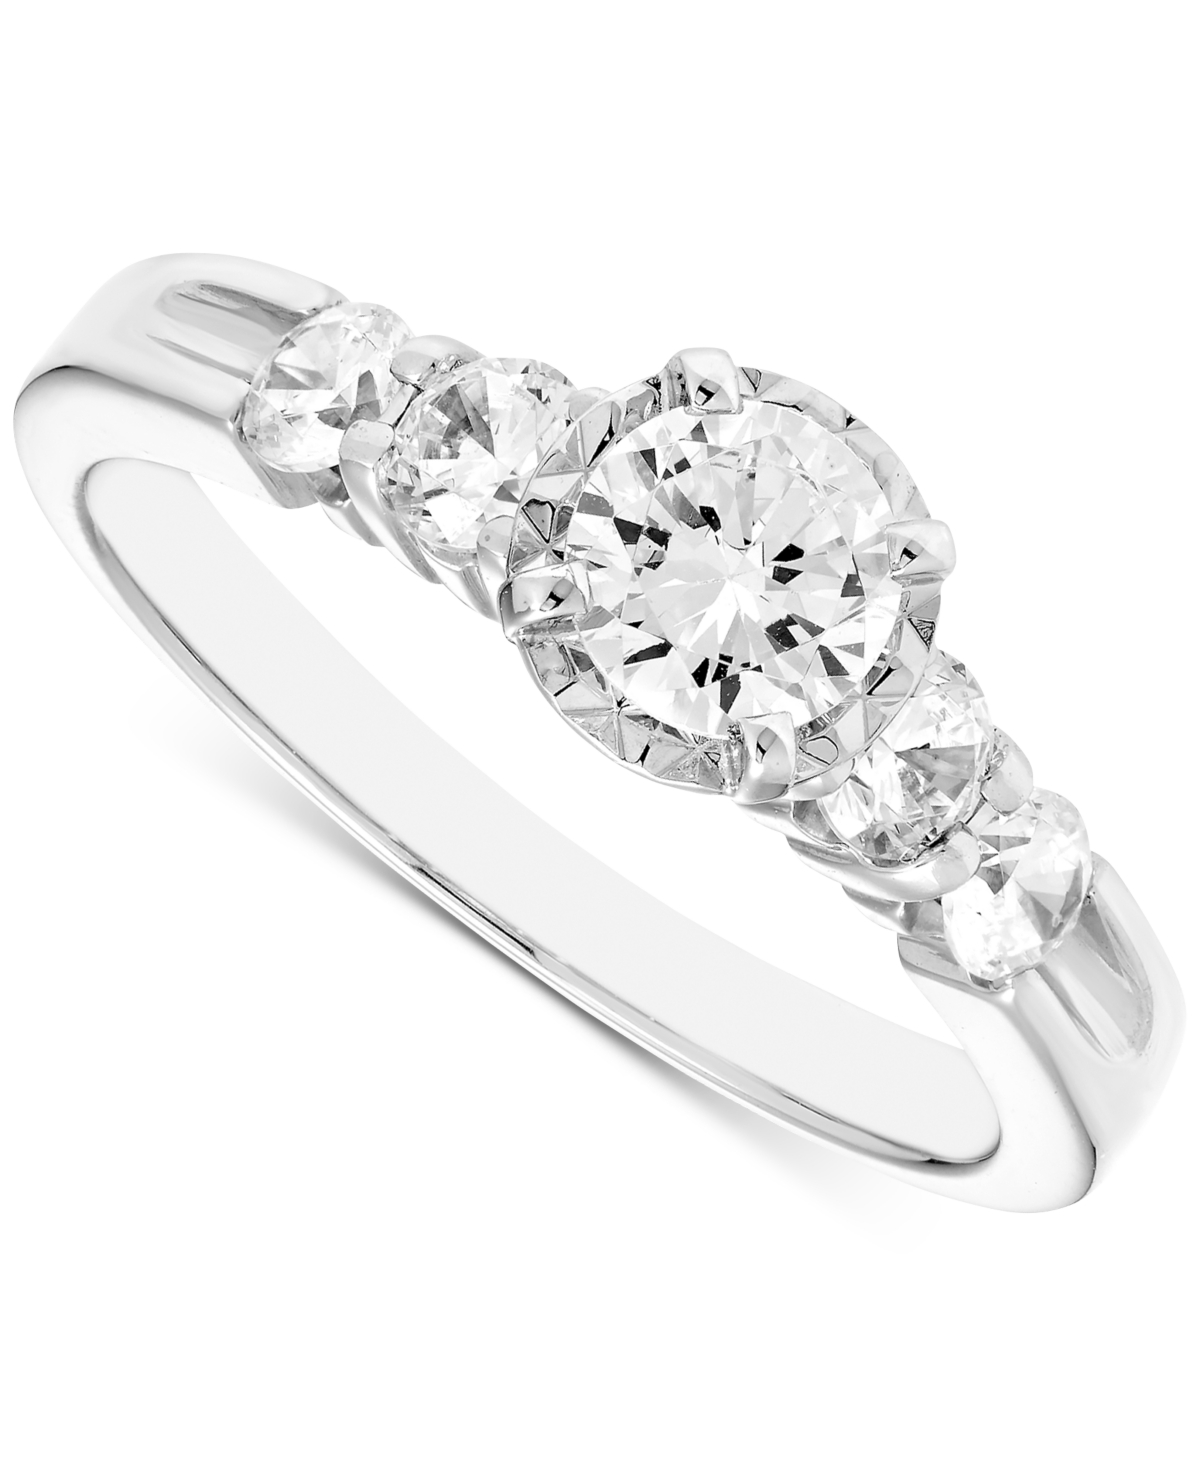 Diamond Engagement Ring (1 ct. t.w.) in 14k White Gold - White Gold